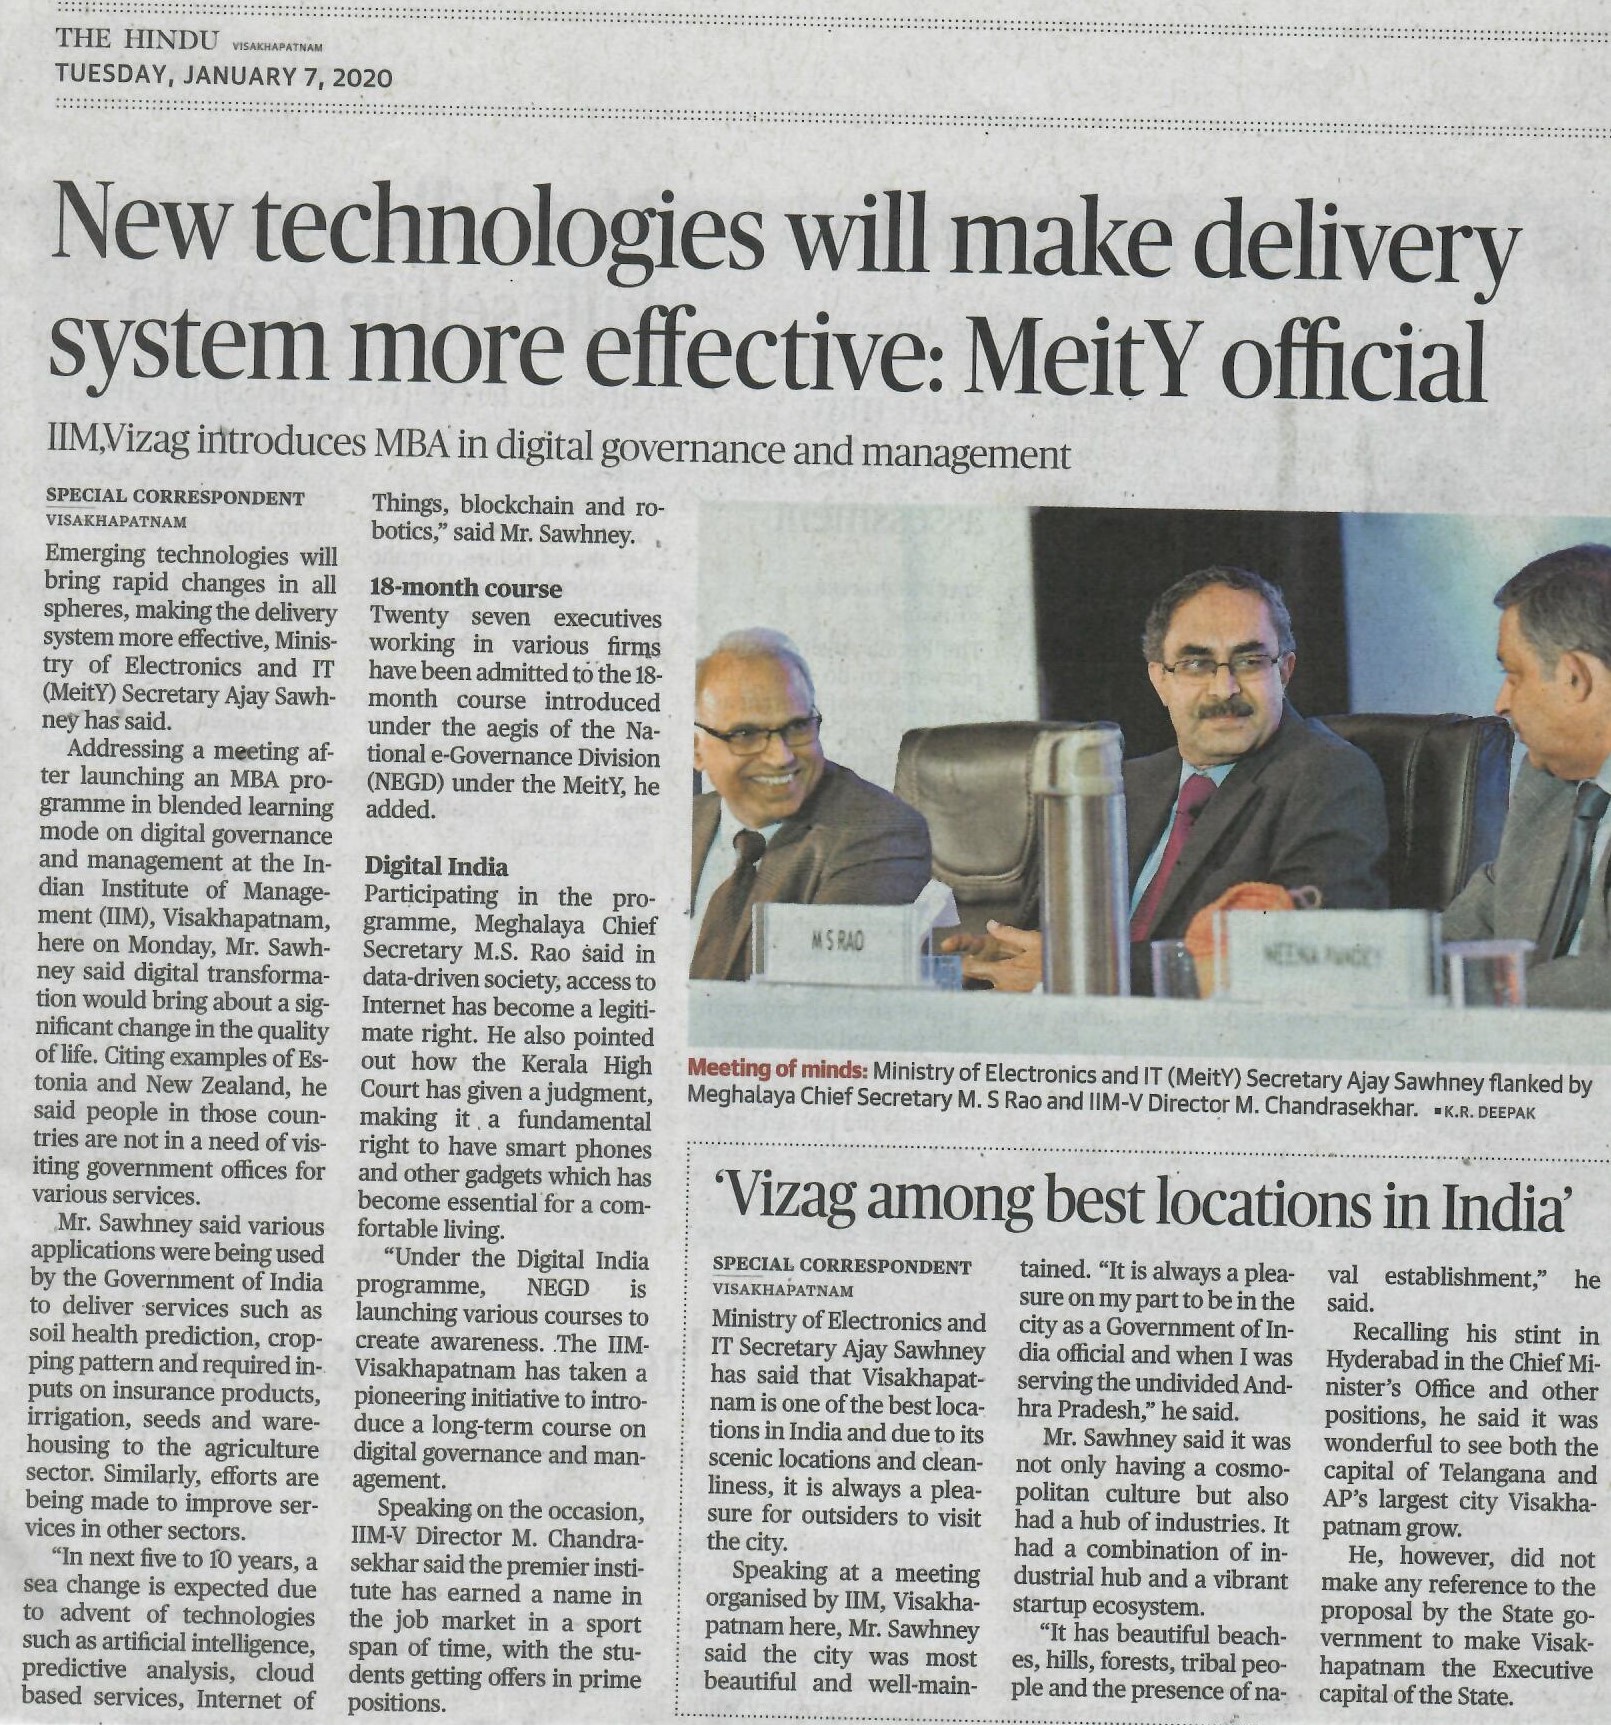 New Technologies will make delivery system more effective MeitY official - 07.01.2020